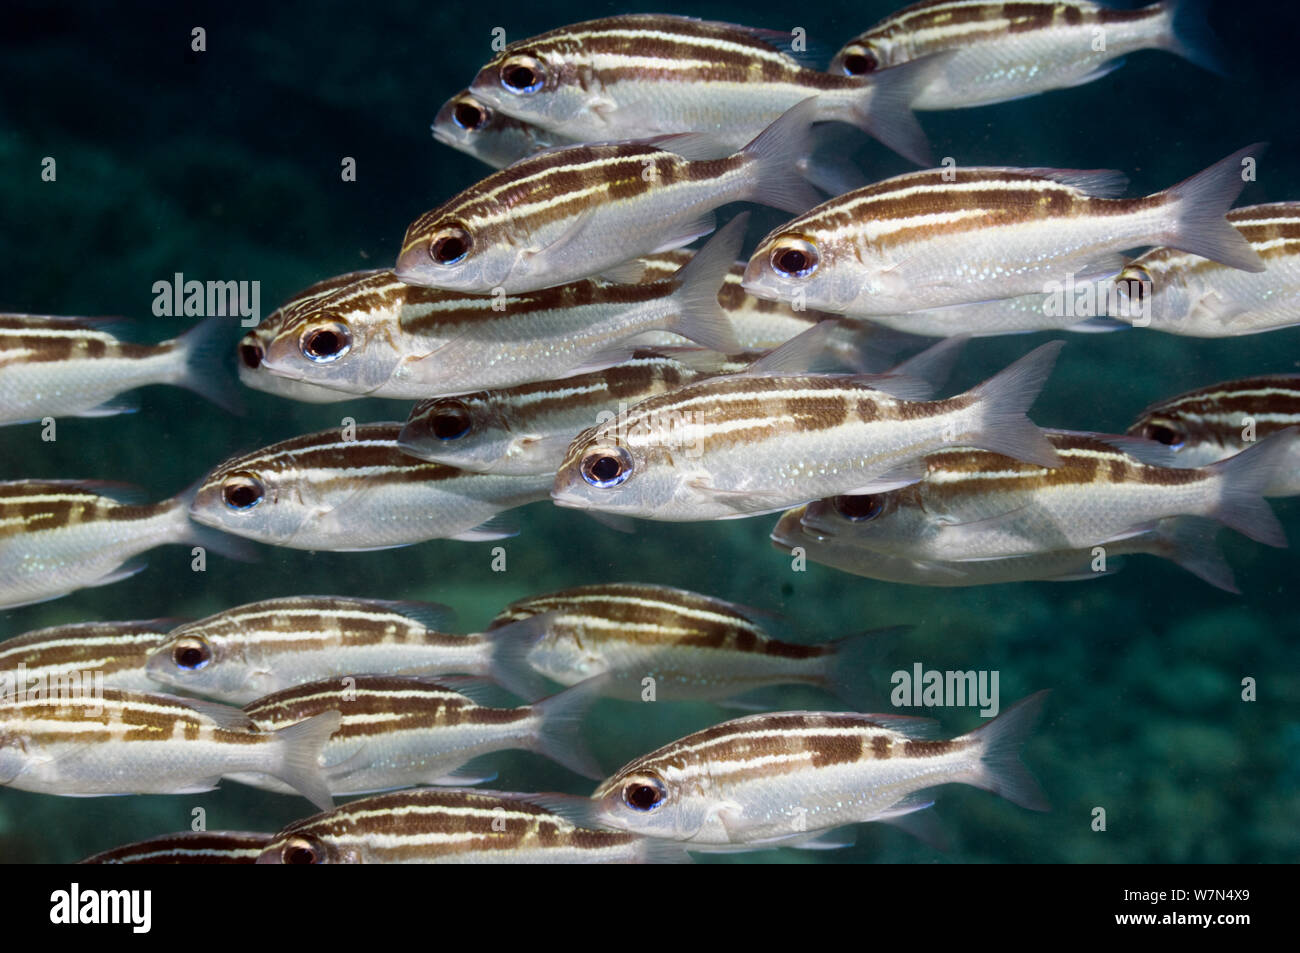 Striped monocle bream or Spinecheek (Scolopsis lineata) Bunaken National Park, Indonesia Stock Photo